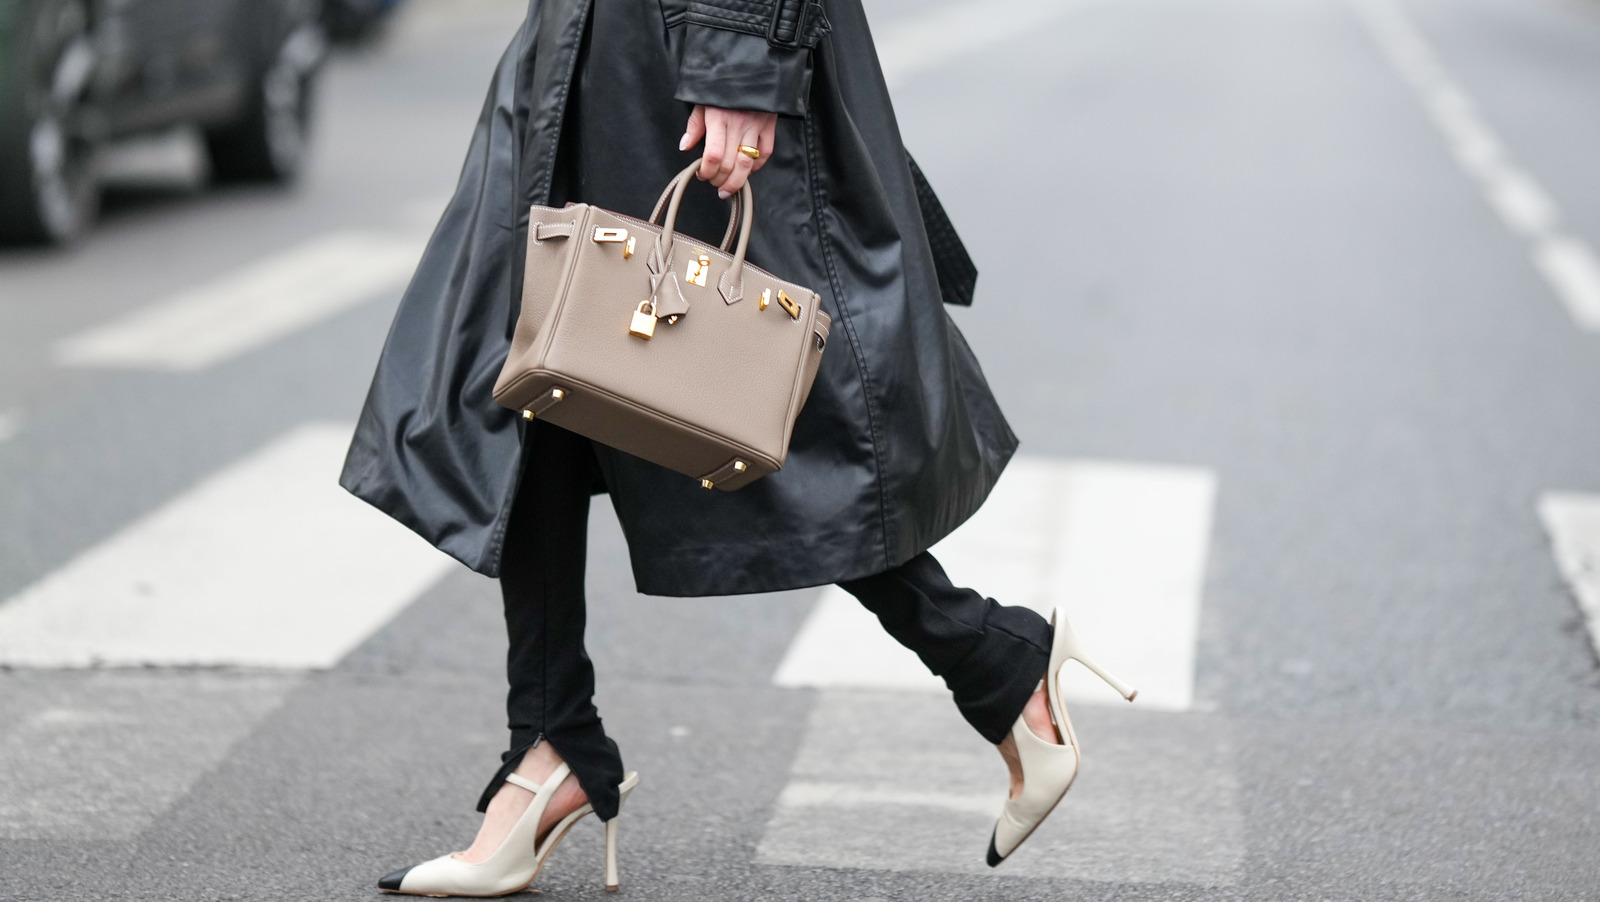 taupe hermes bag - Google Search  Street style chic, Fashion, Street style  outfit